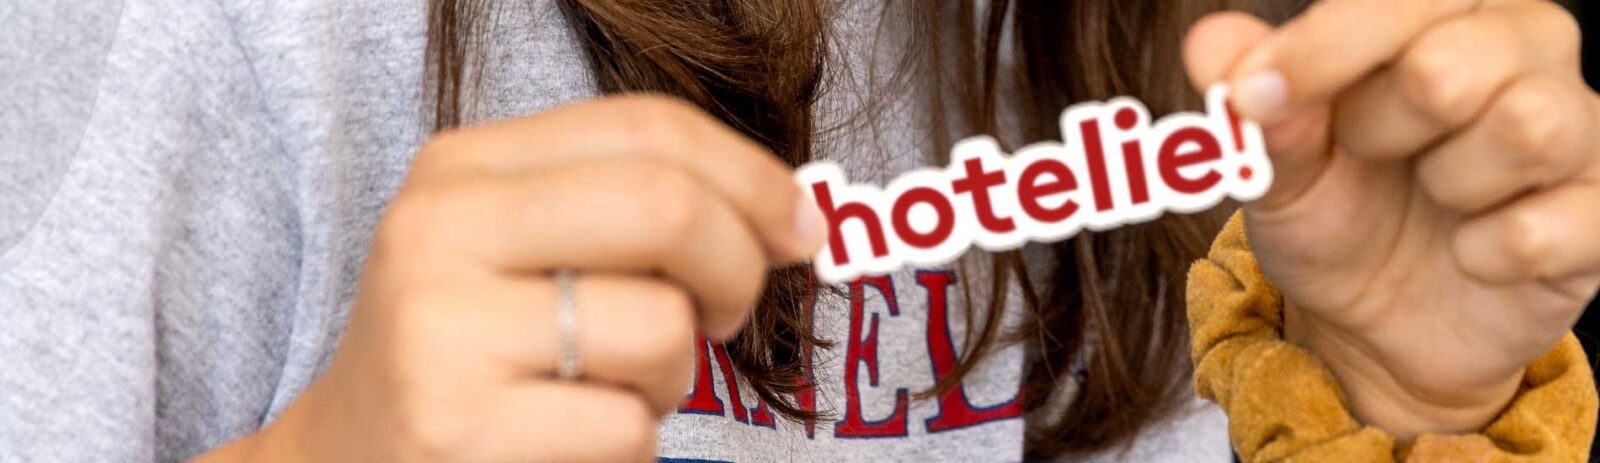 A person holds a sticker that says "hotelie!"